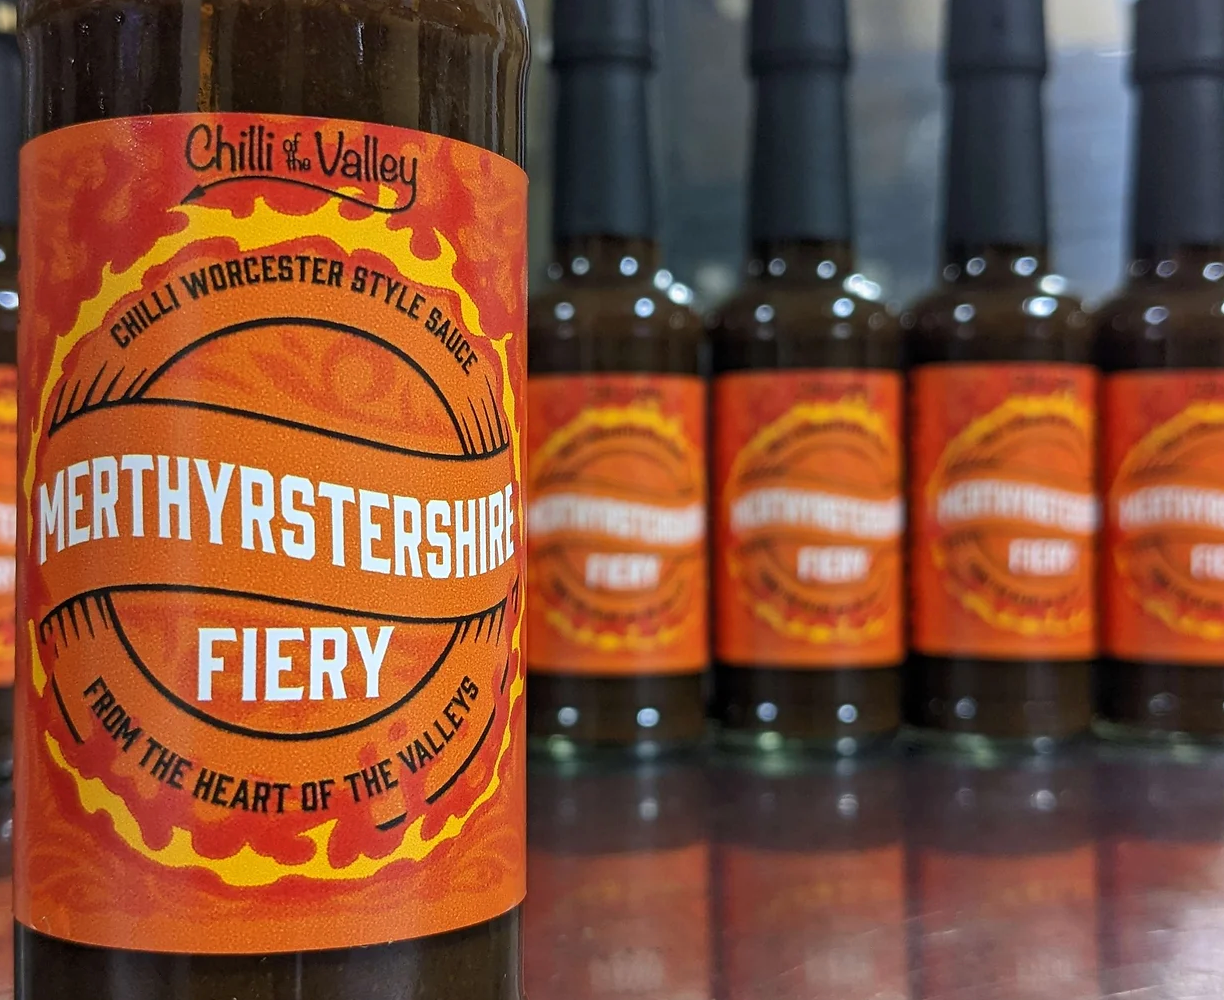 Chilli of the Valley - Merthyrstershire Fiery - 150ml (hot)